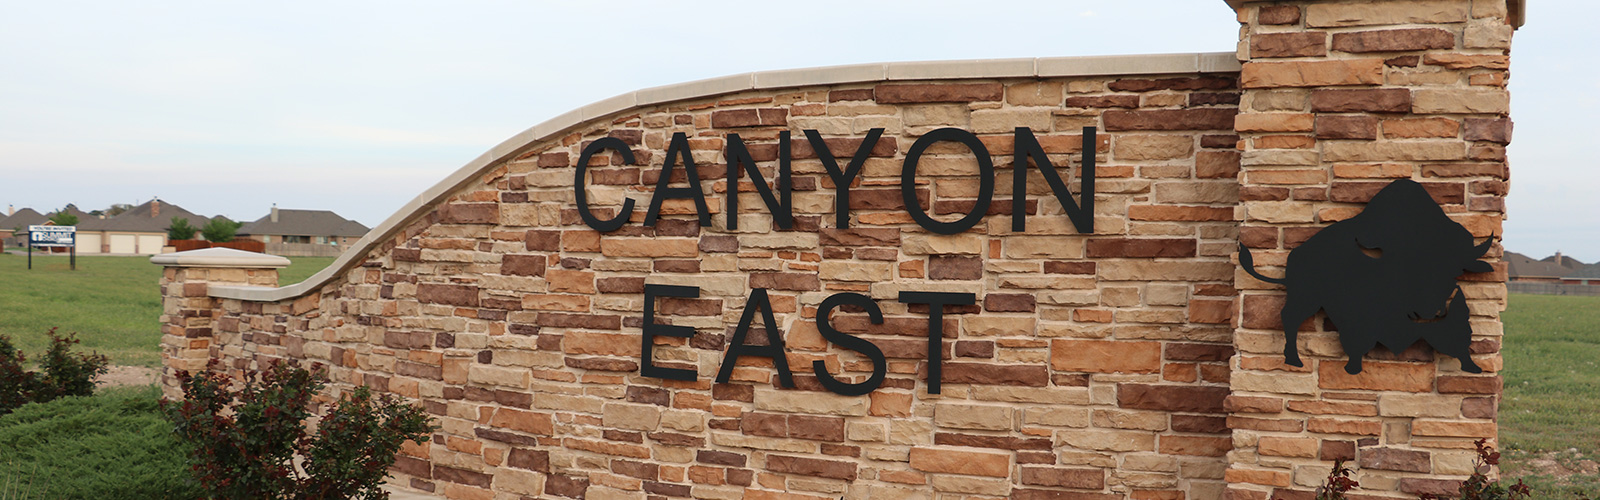 New Homes for Sale in Canyon East Canyon TX